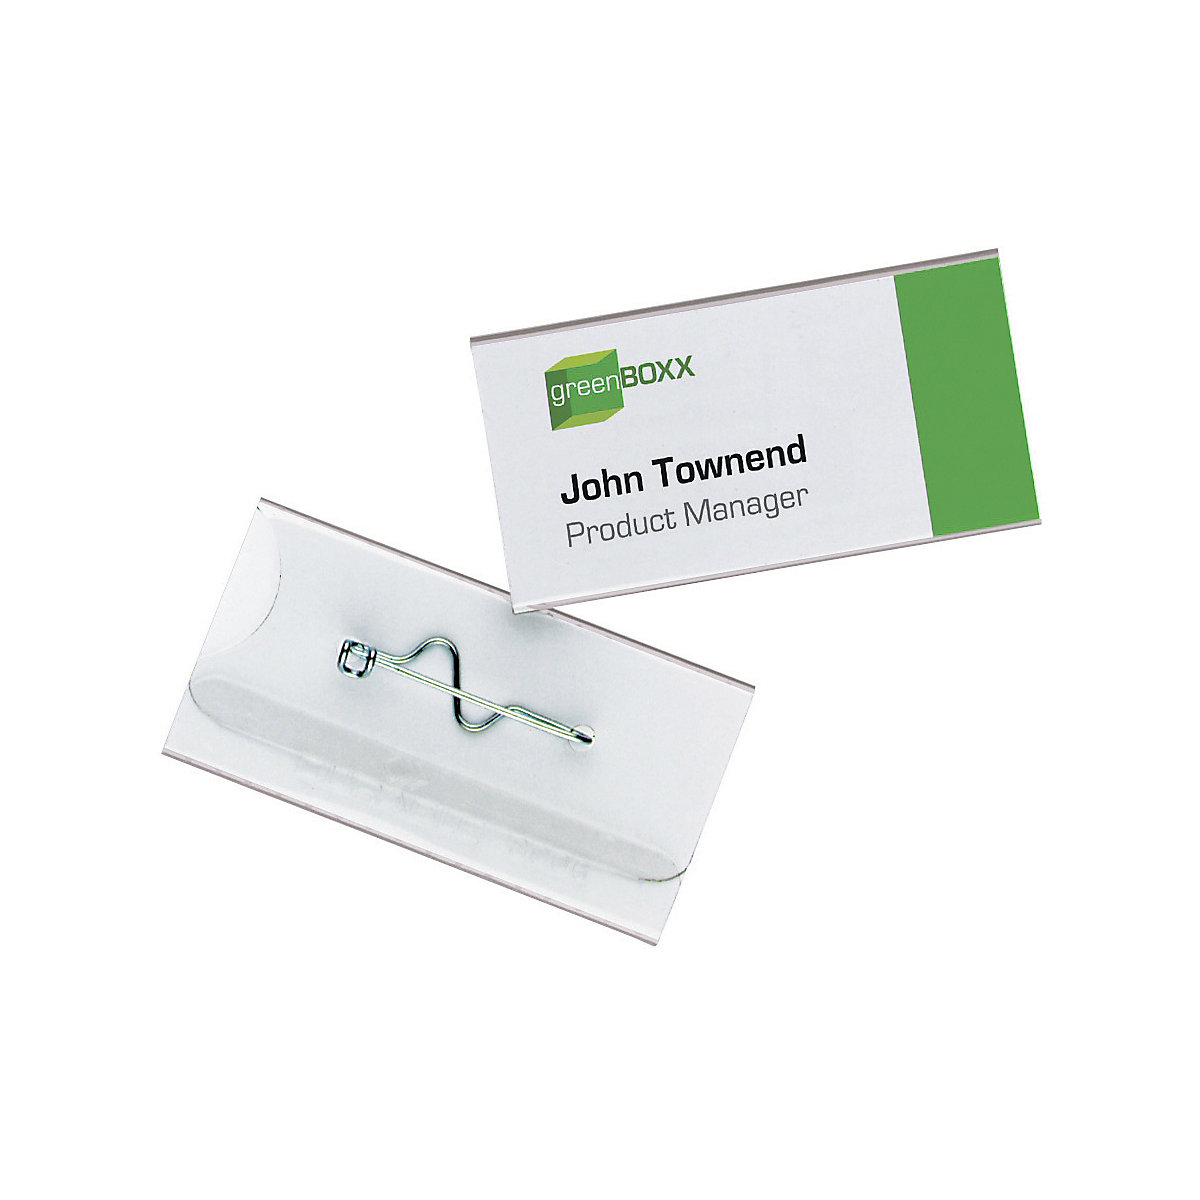 Name badges with corrugated needle – DURABLE